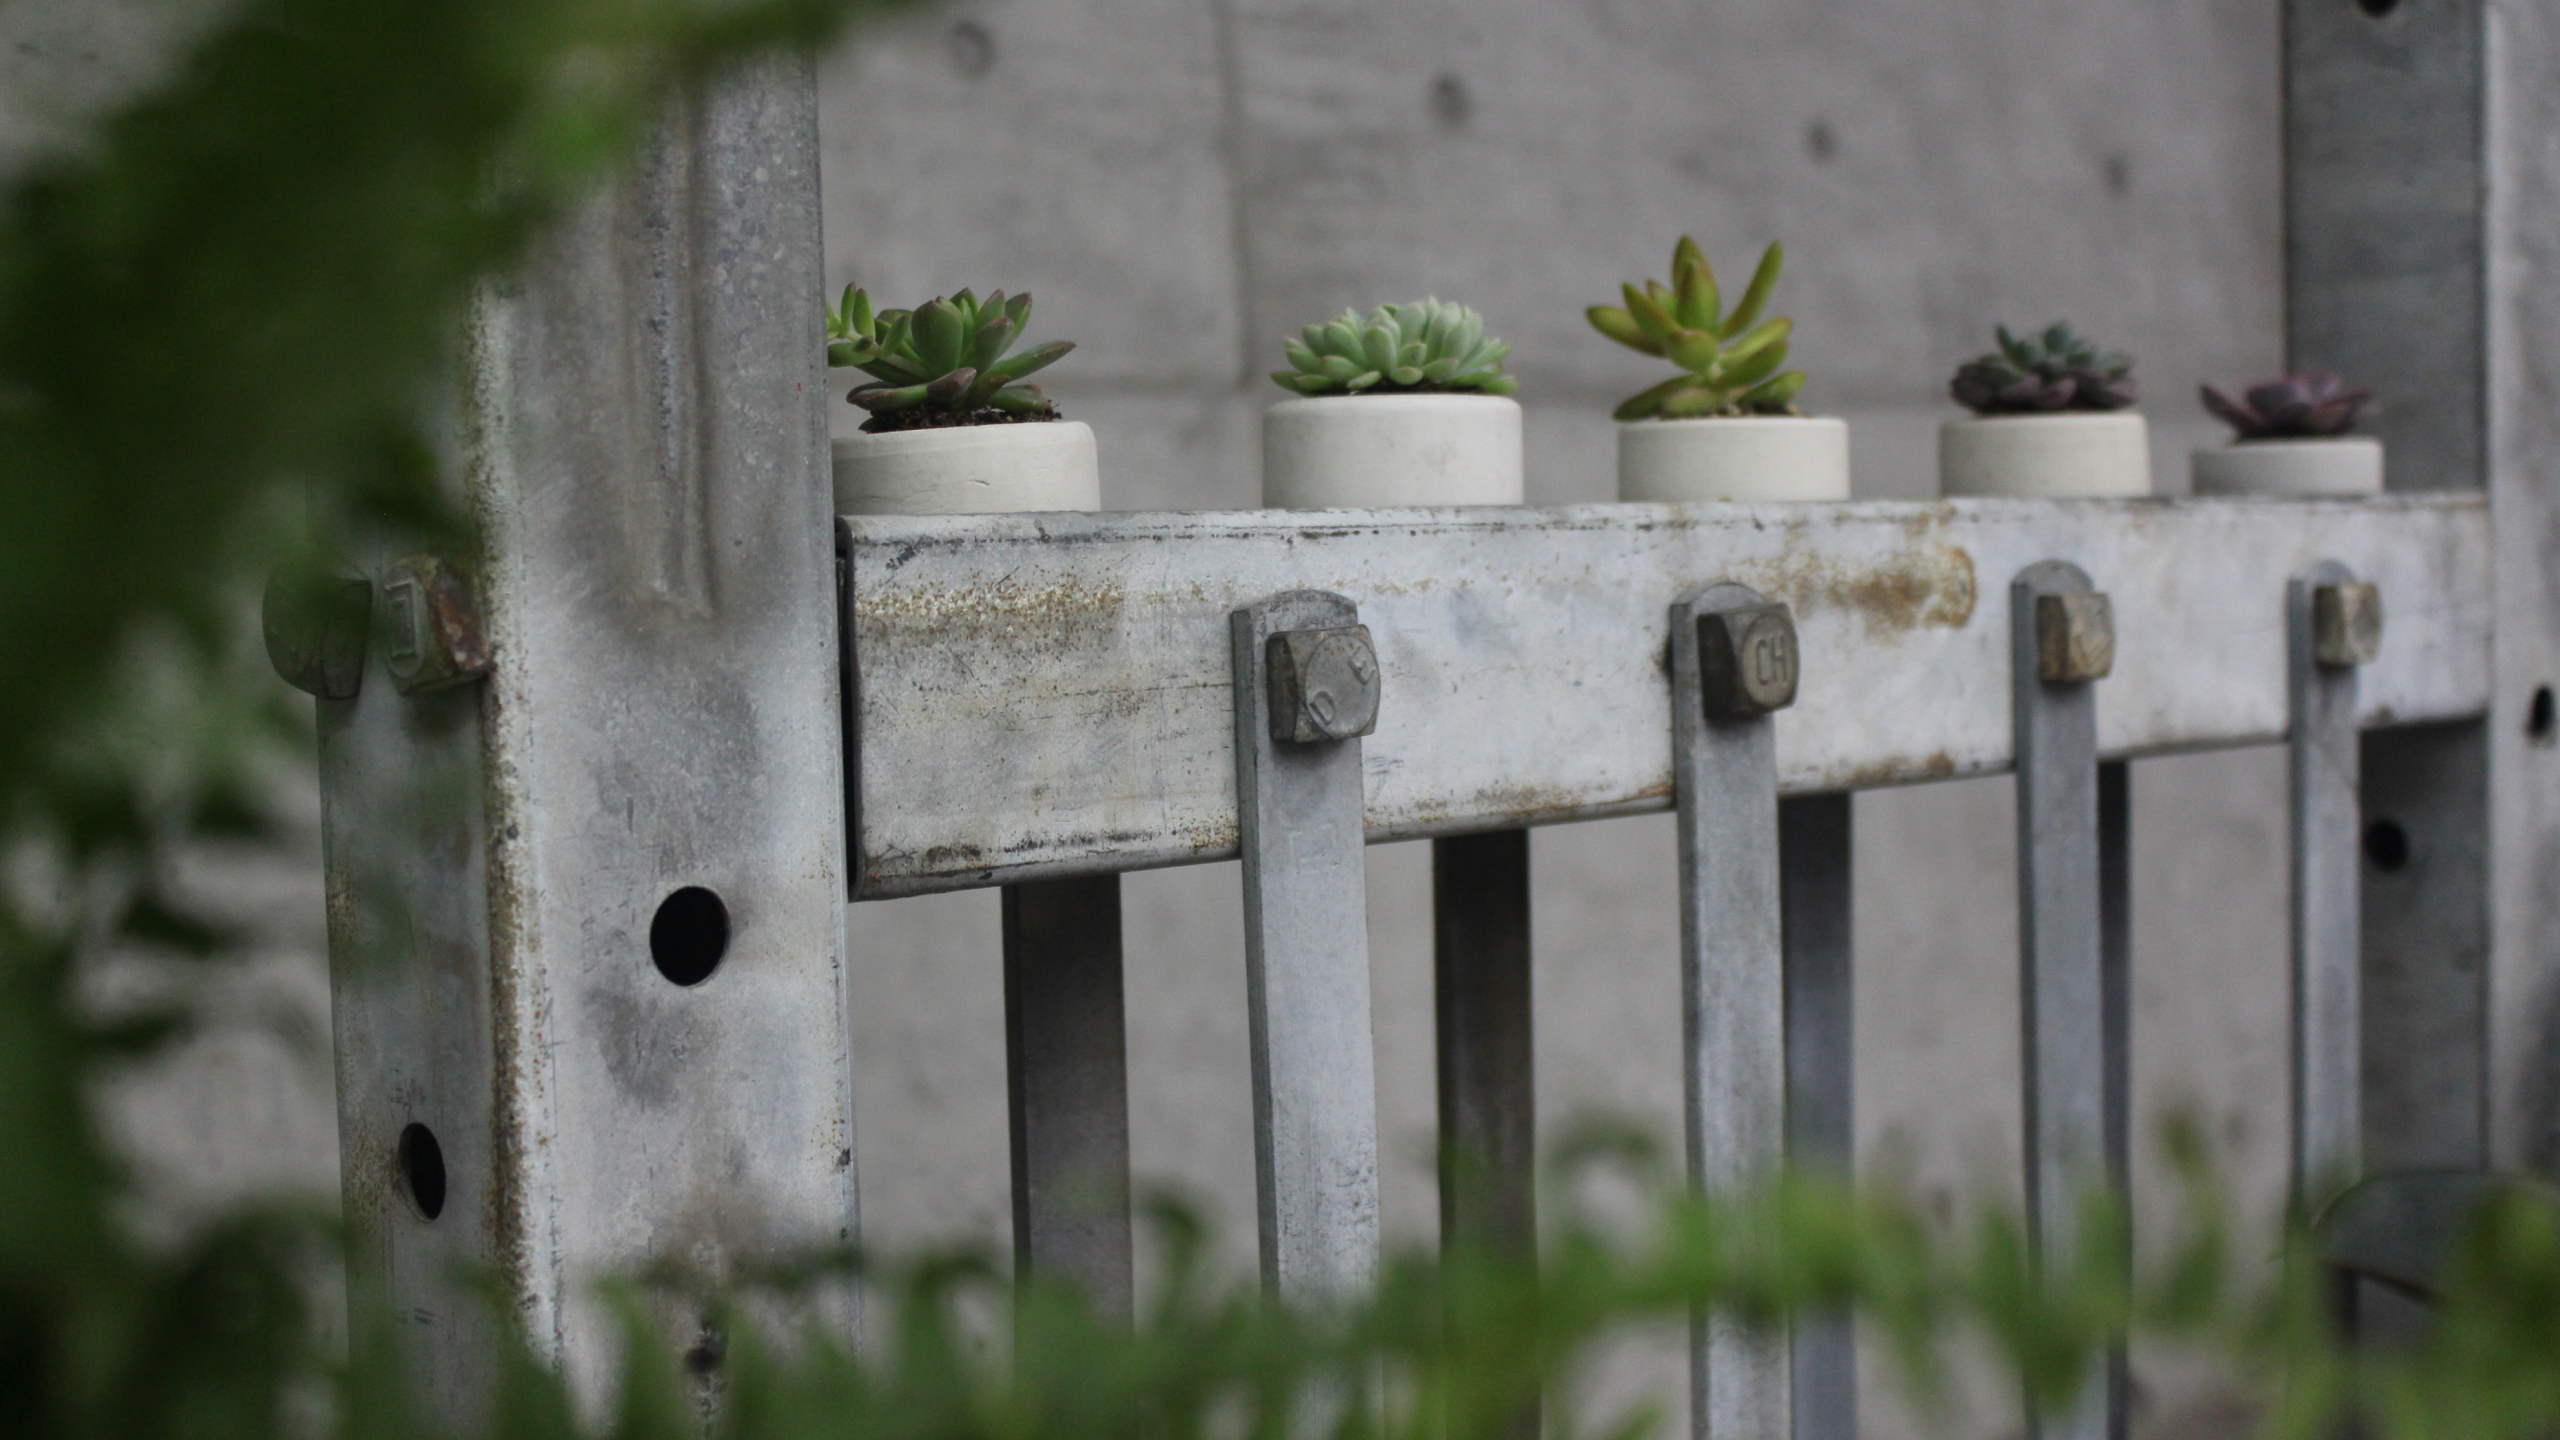 a sturdy gate-like iron structure holds several ceramic succulent planters